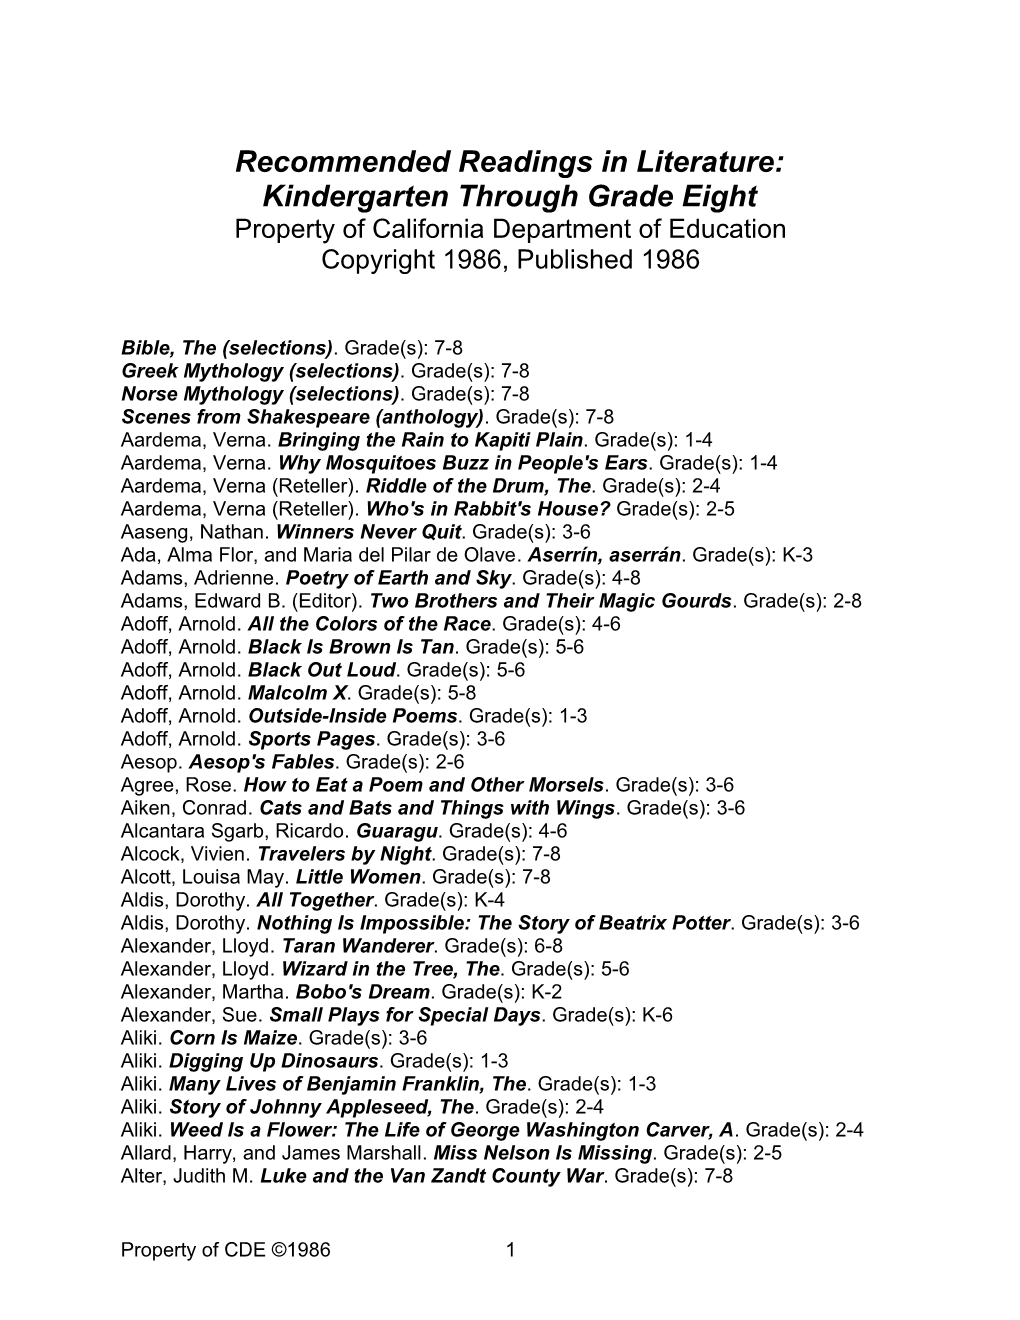 List 1: Rec. Reading K-8 - Recommended Literature (CA Dept of Education)